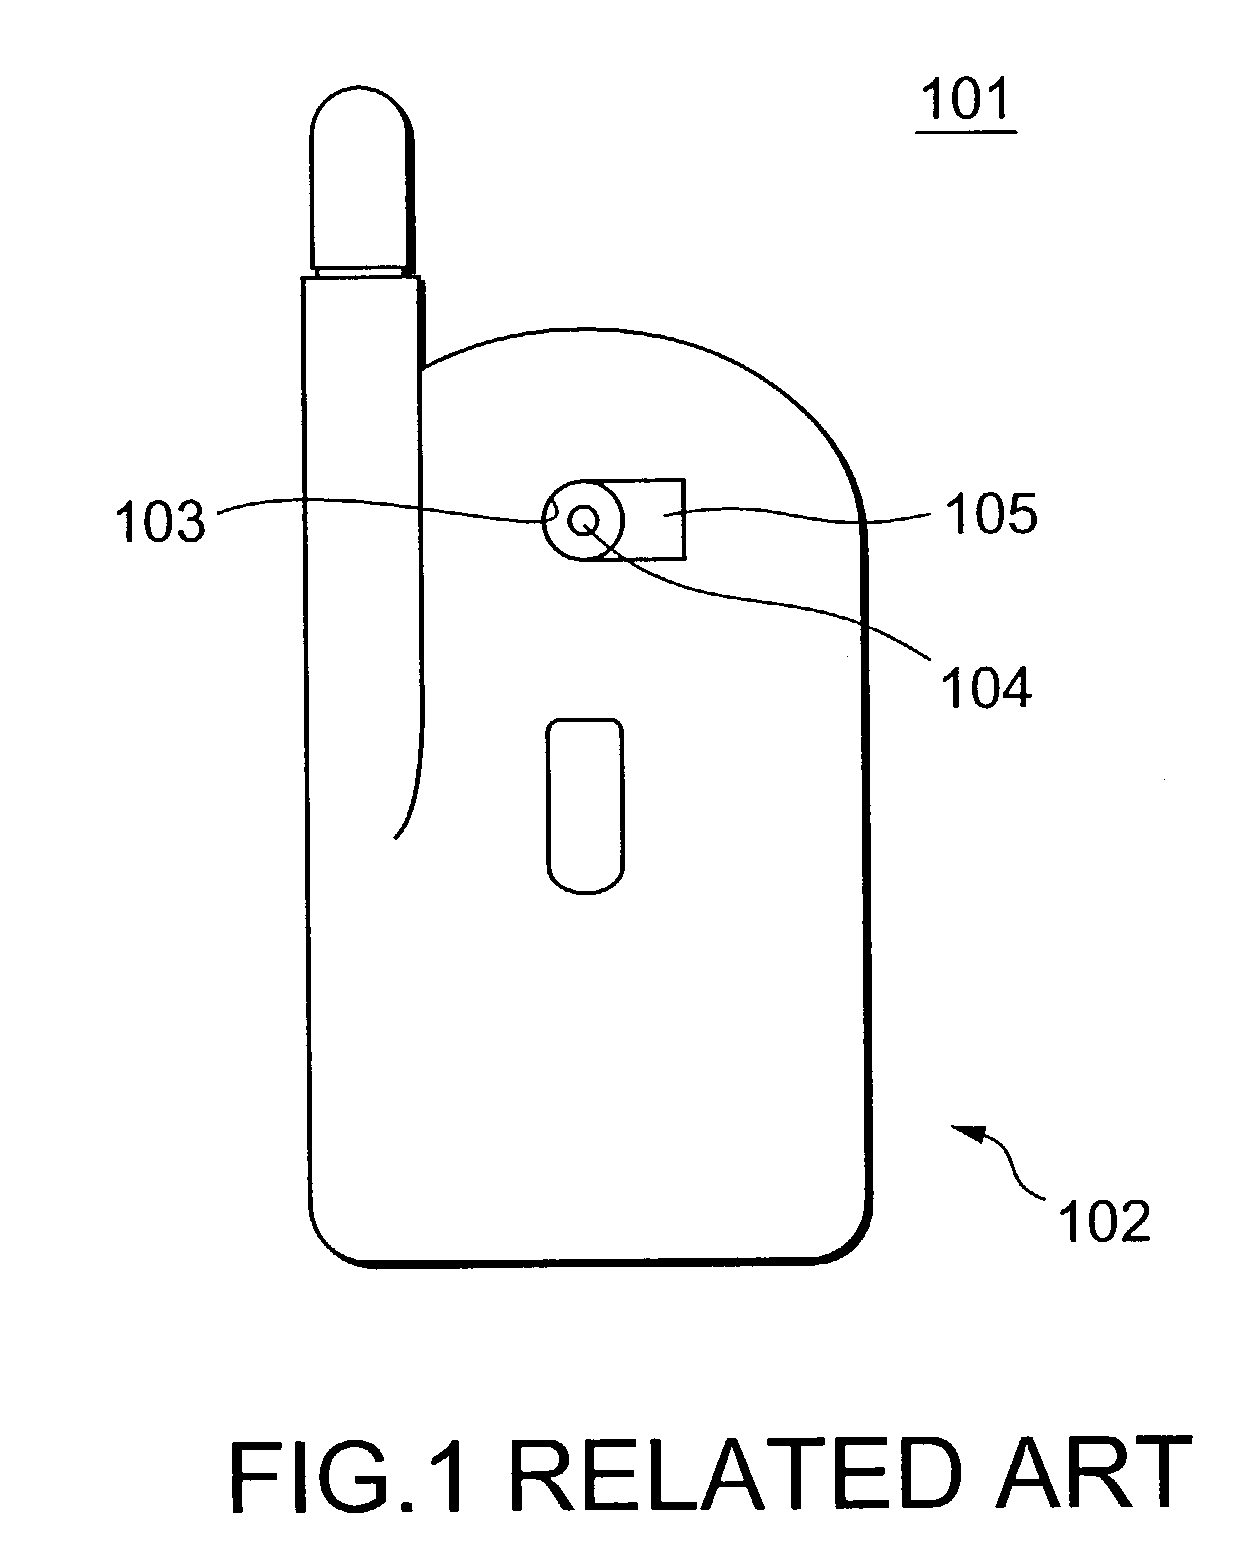 Portable electronic equipment having a photographic function and a concealable lens